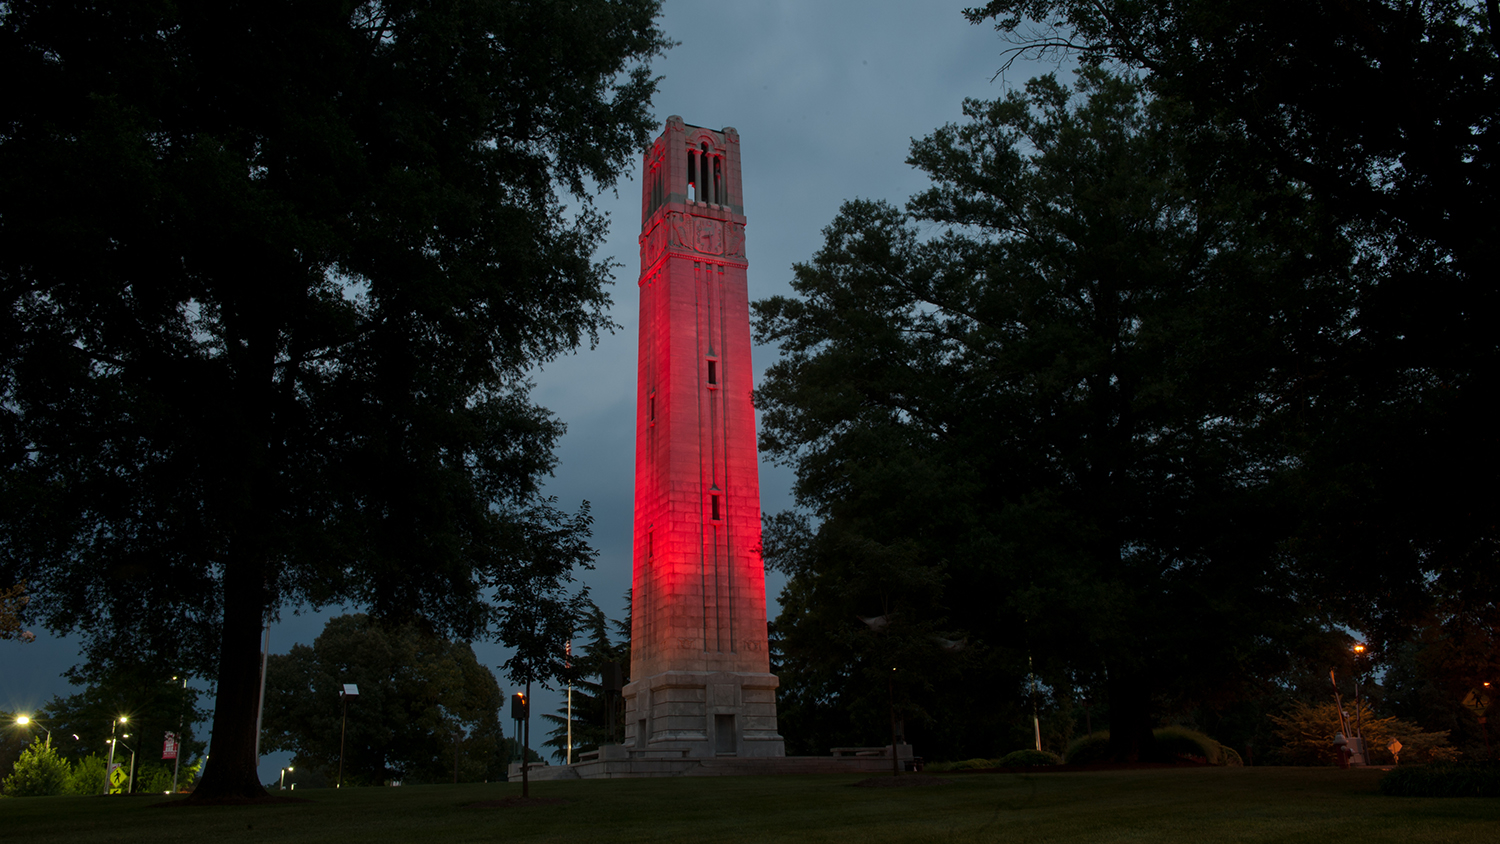 The belltower illuminated in red at dusk